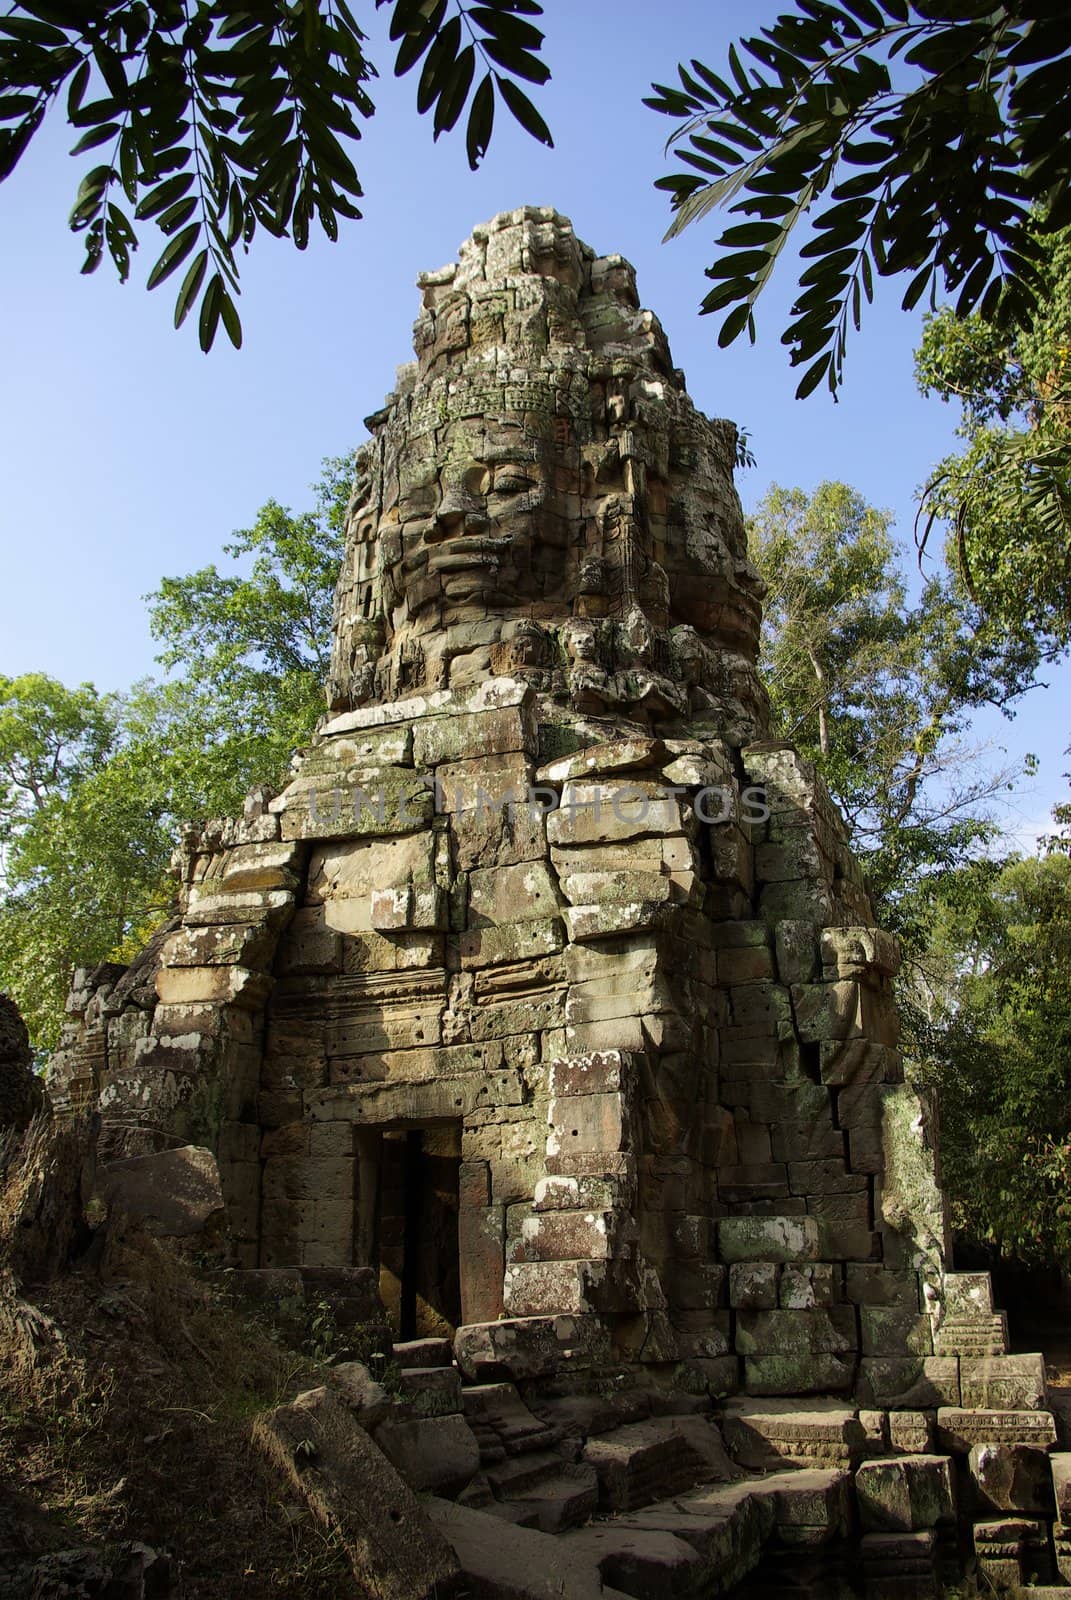 It's a view with vegetation of one tower of the Bayon temple in Angkor